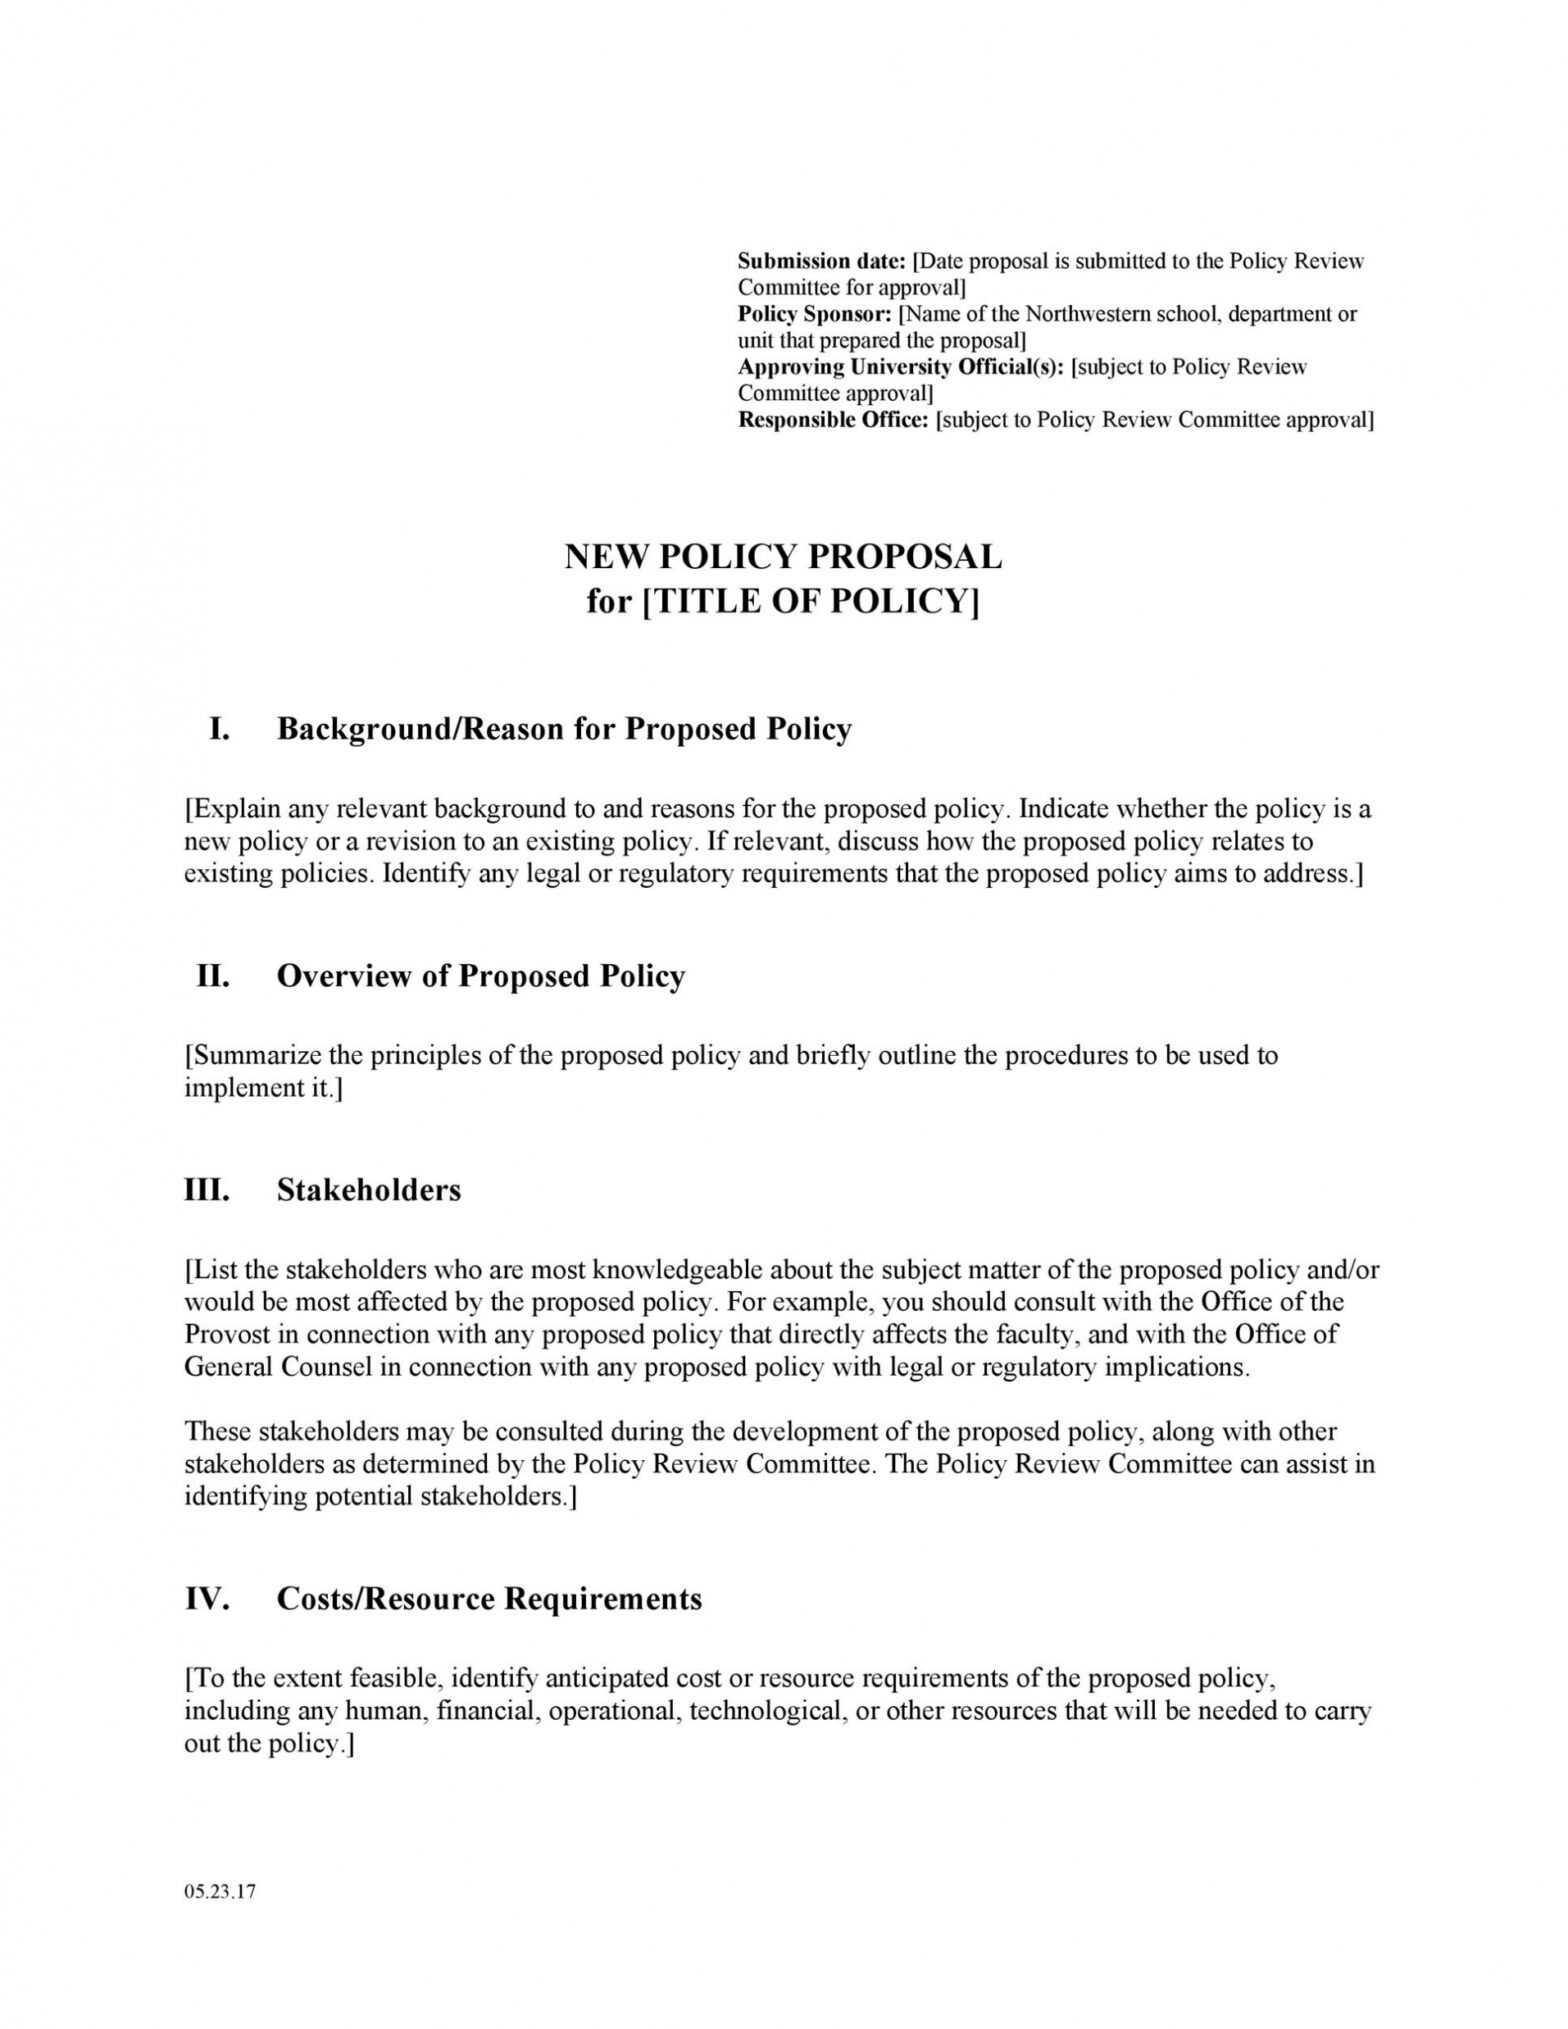 30 Professional Policy Proposal Templates [&amp; Examples] ᐅ with Policy Proposal Template